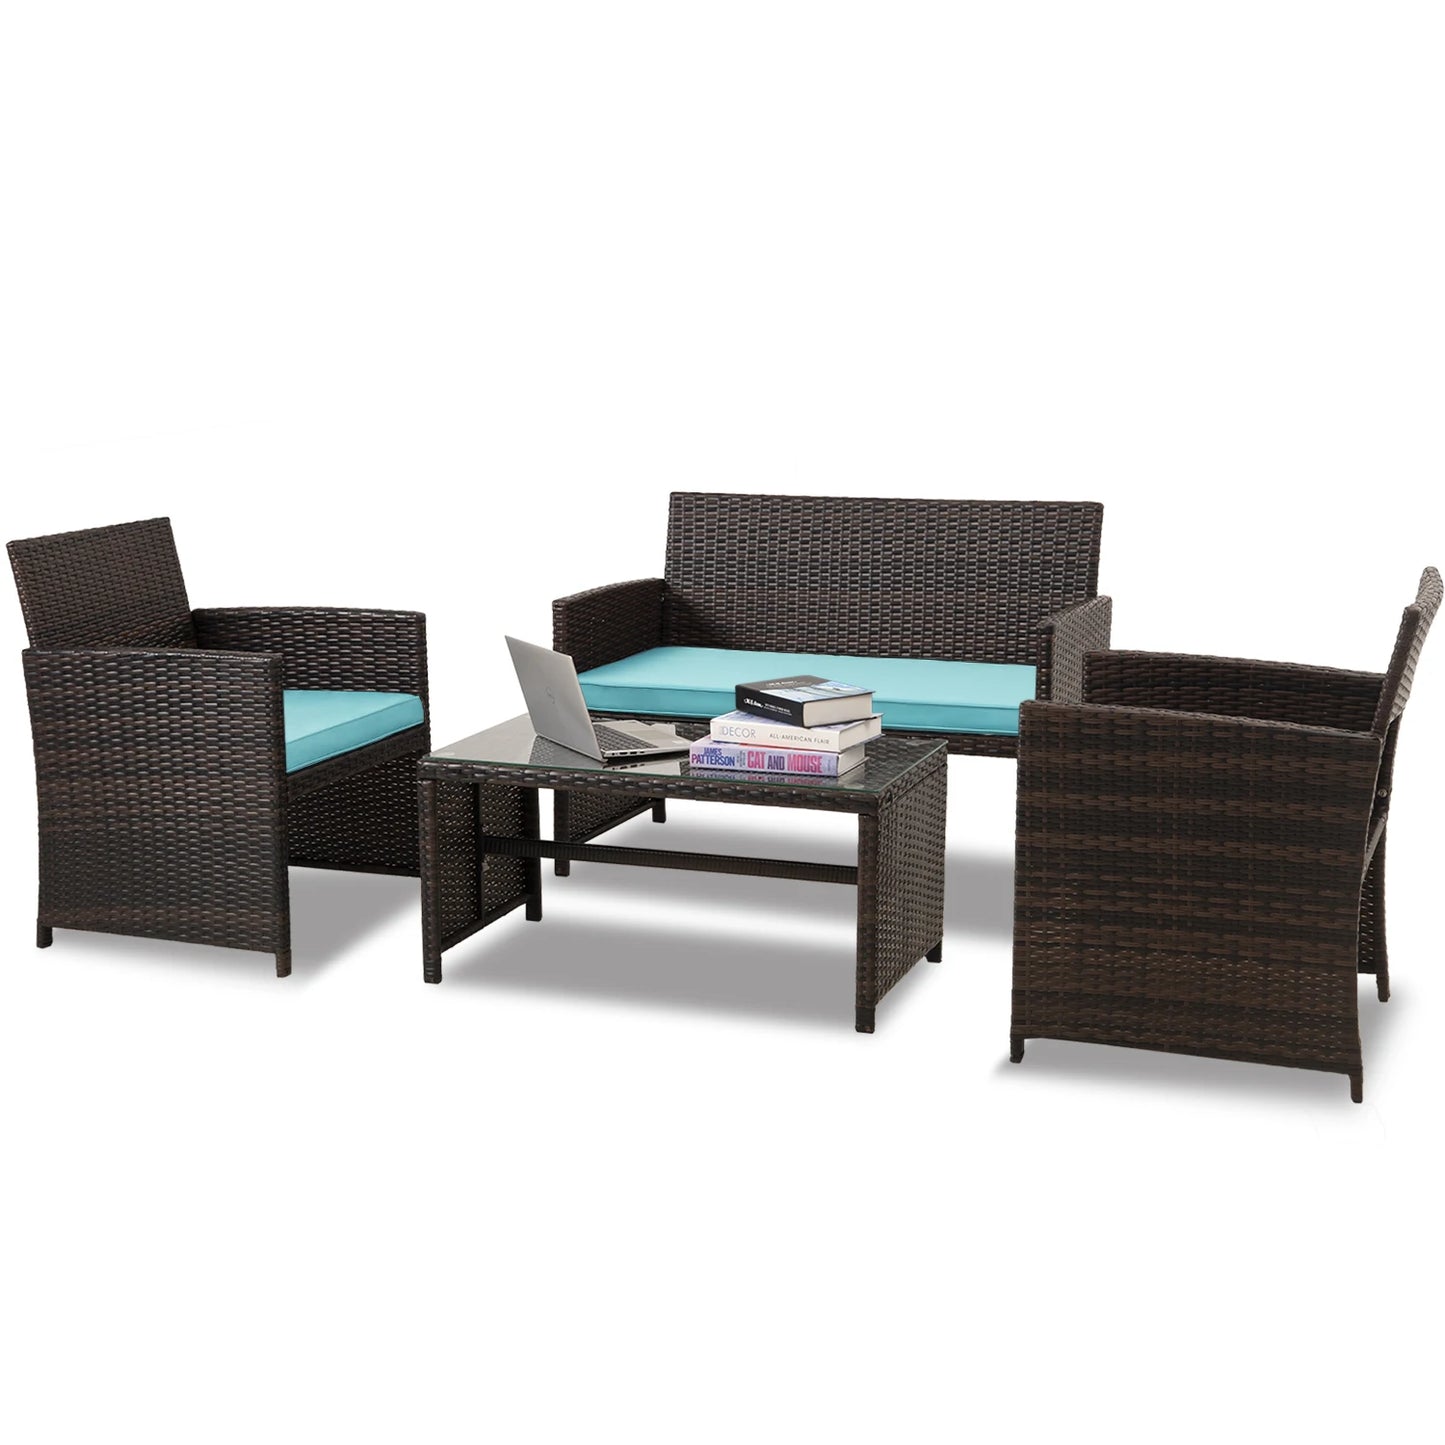 4 Pc Outdoor Wicker Furniture Set with Soft Cushions and Glass Tabletop